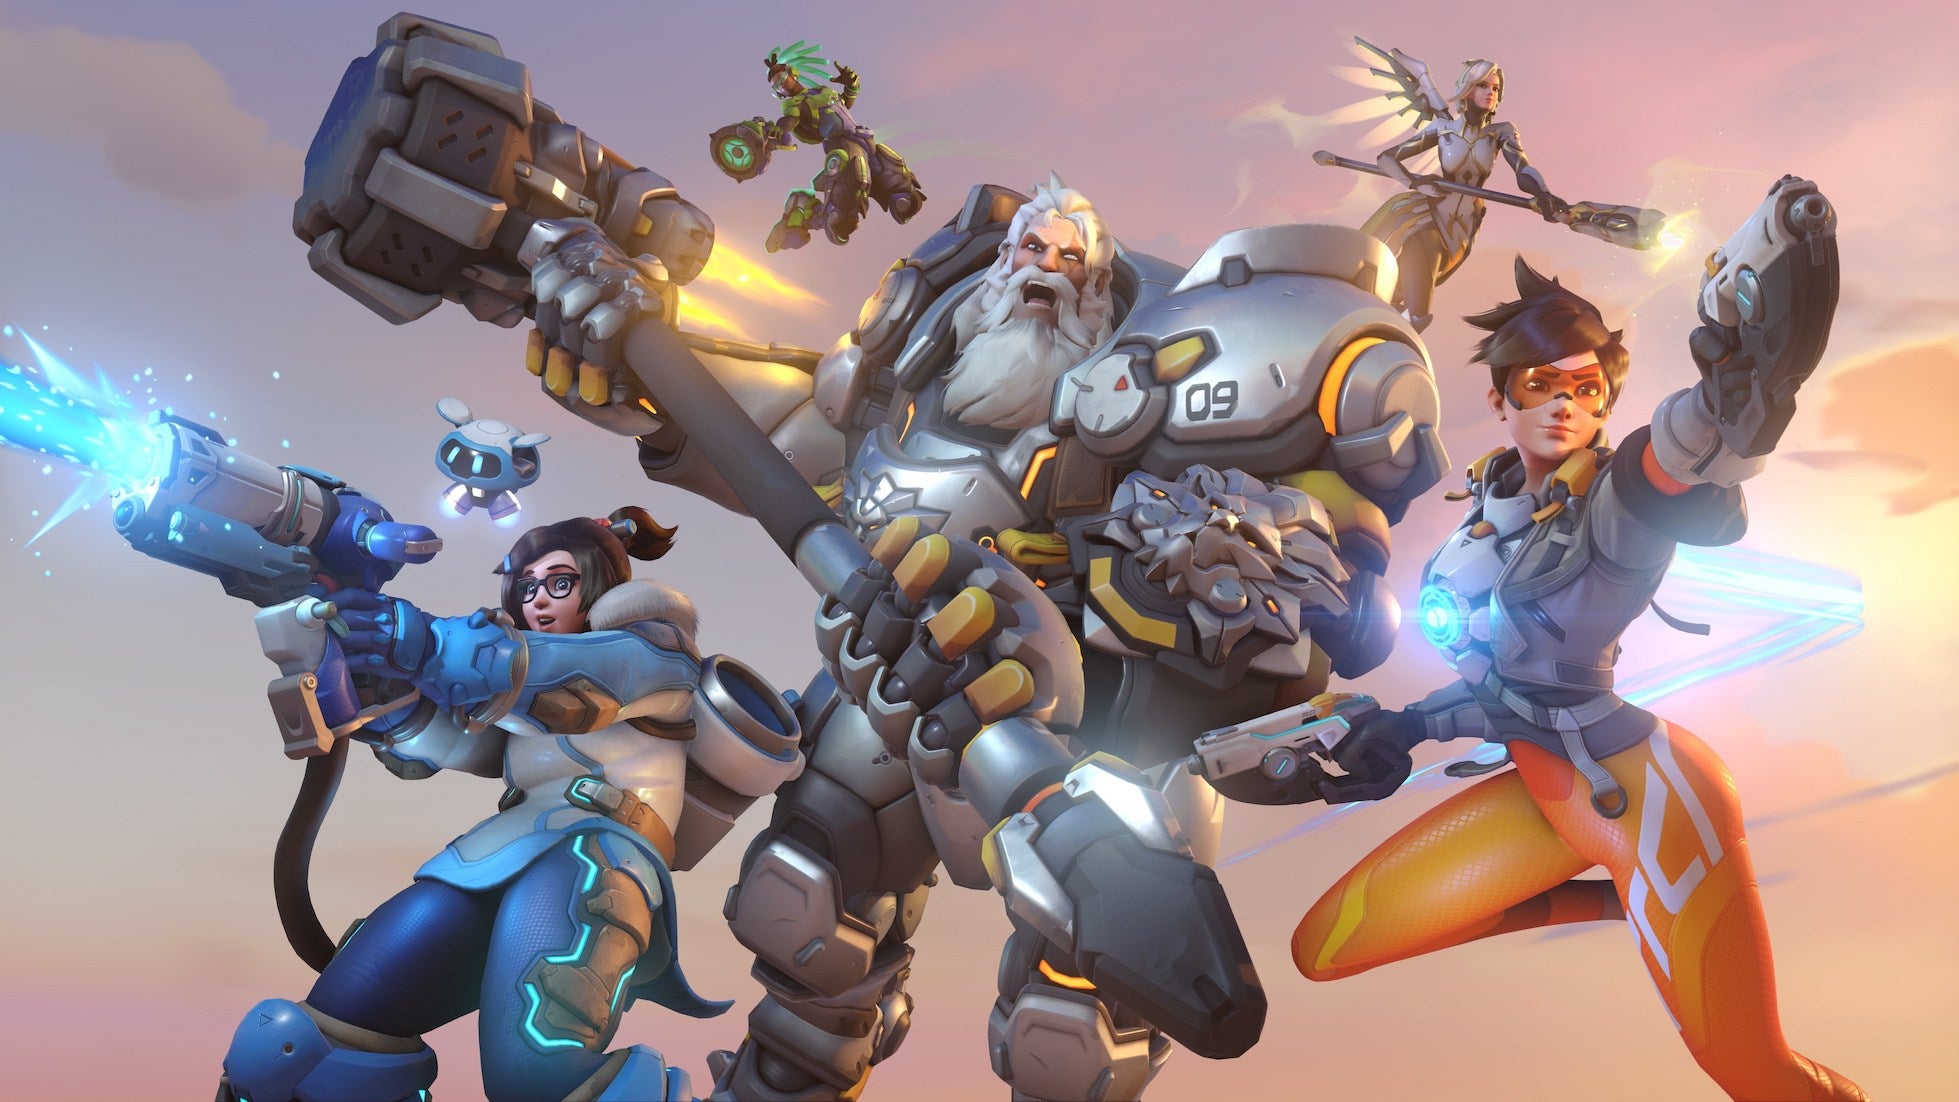 Overwatch 2's key art featuring Tracer and Mei in heroic poses